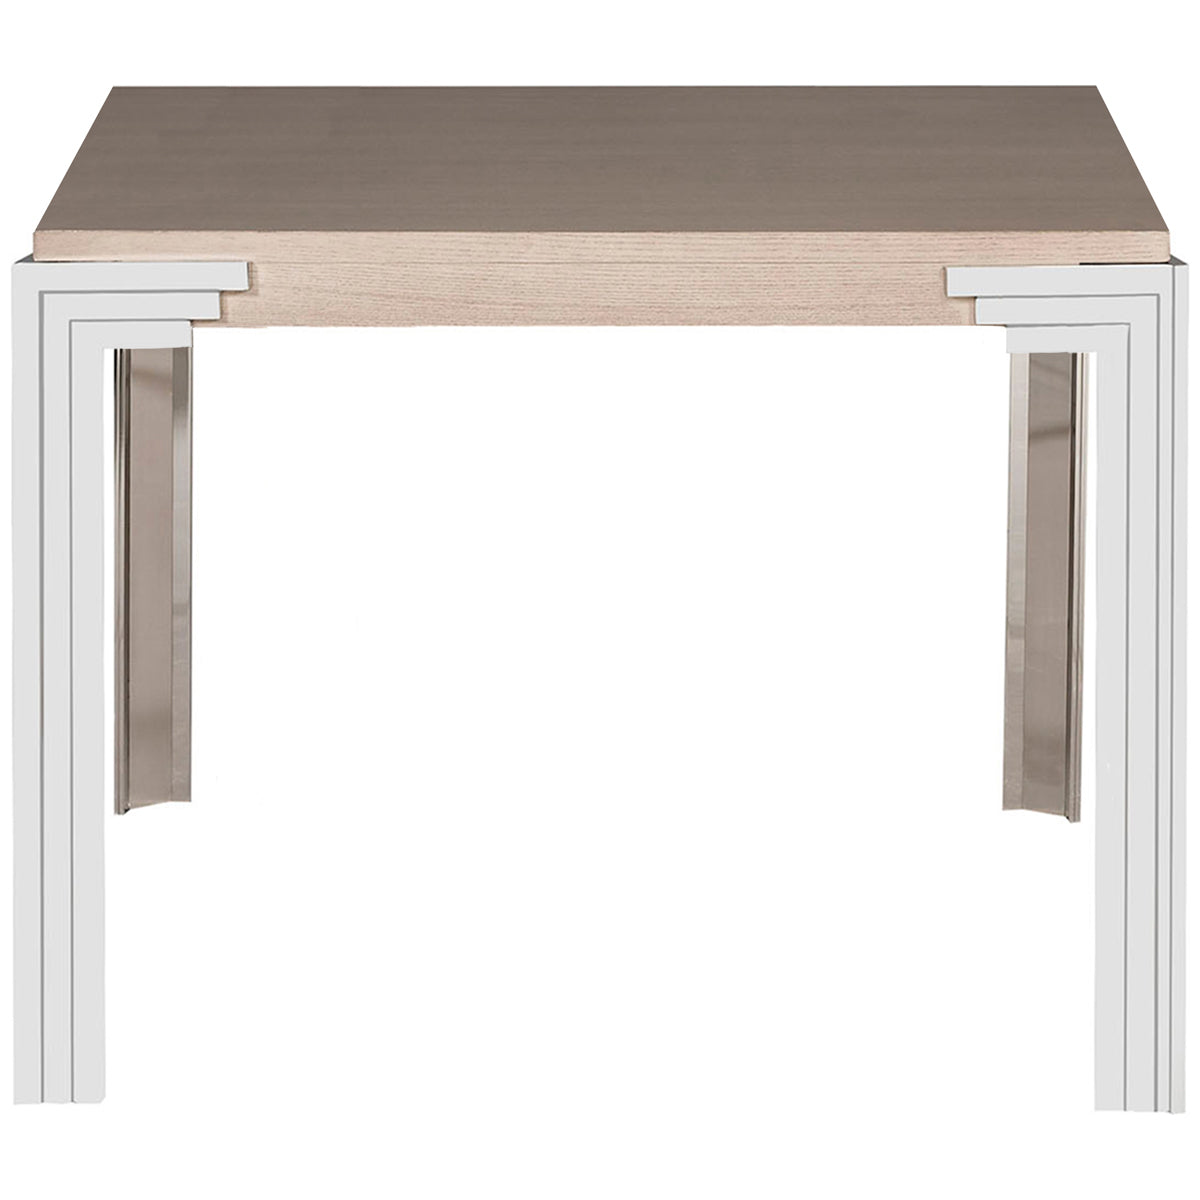 Vanguard Furniture Deco Dining Table with Deco Leg